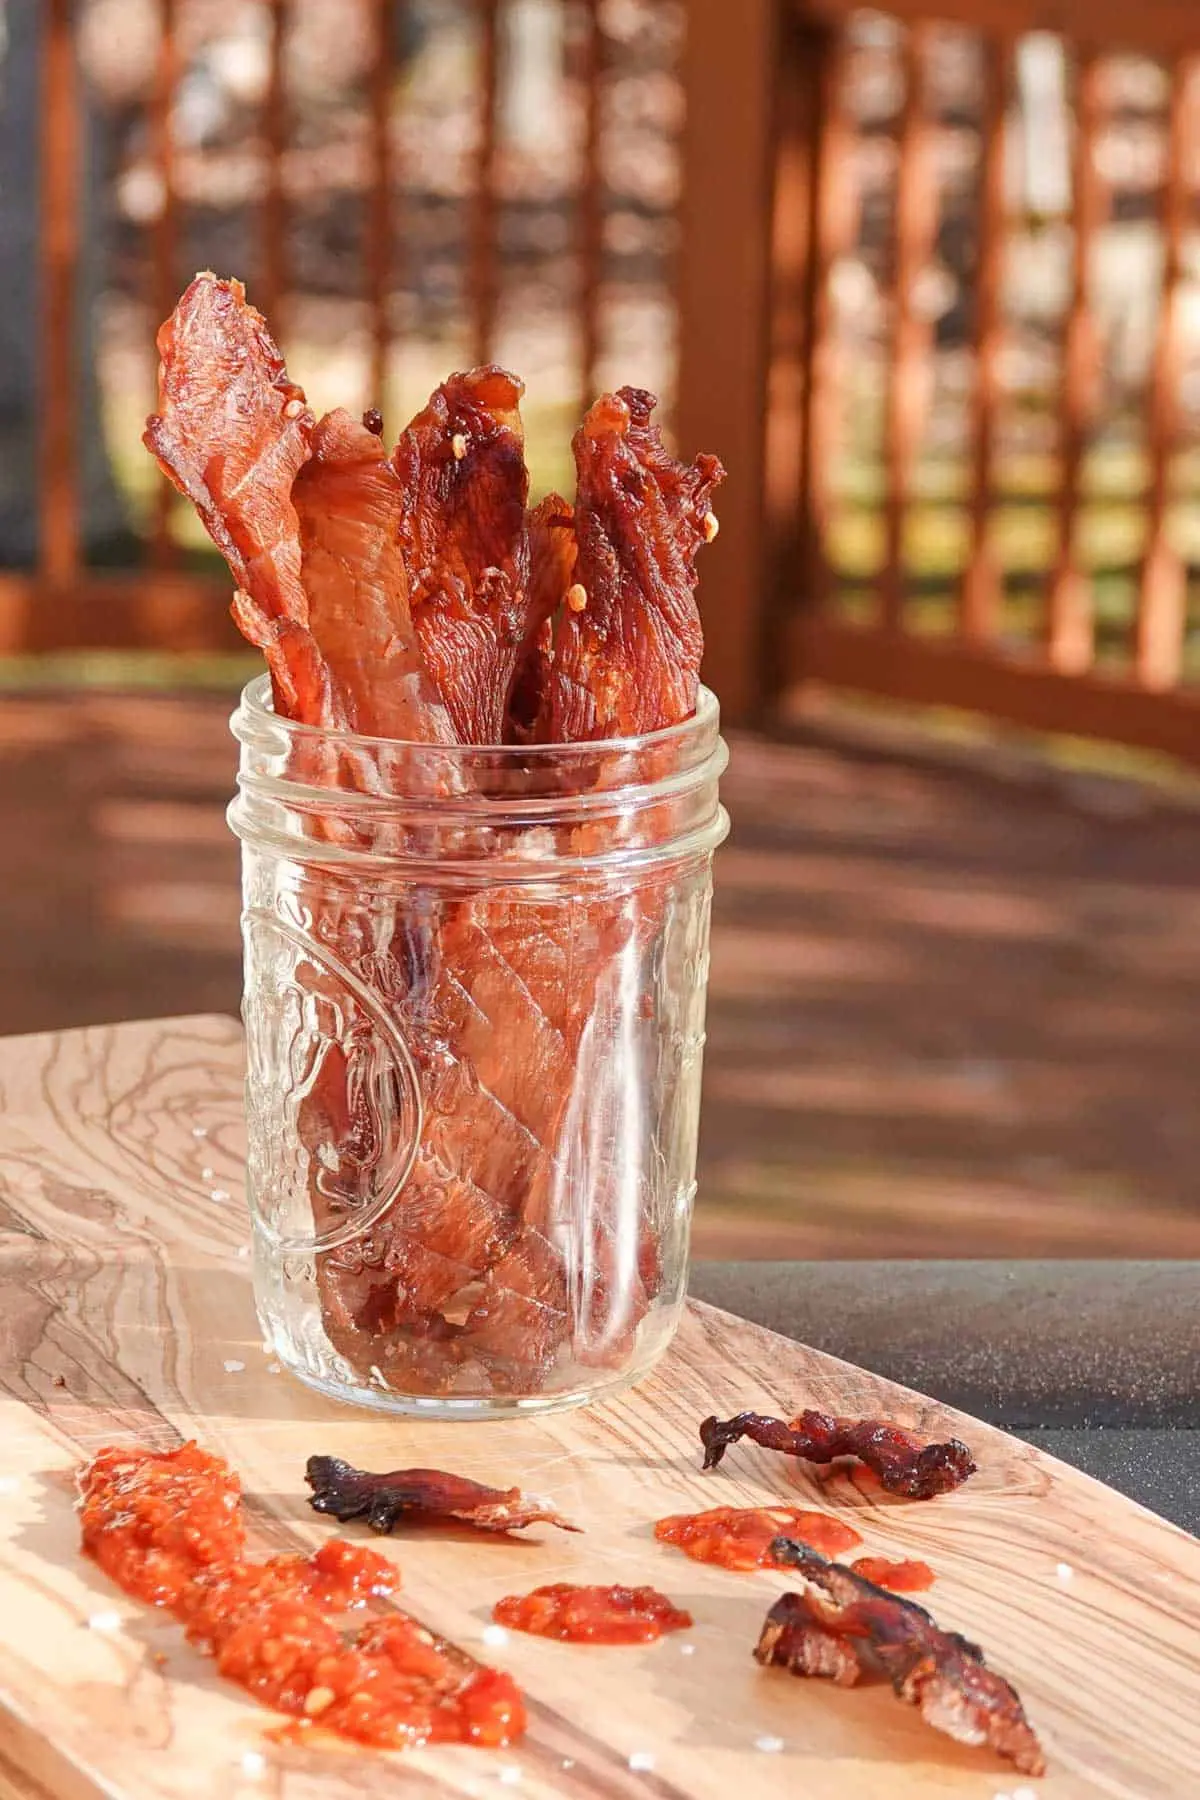 smoked chicken jerky recipe - Do you need to cook chicken before dehydrating